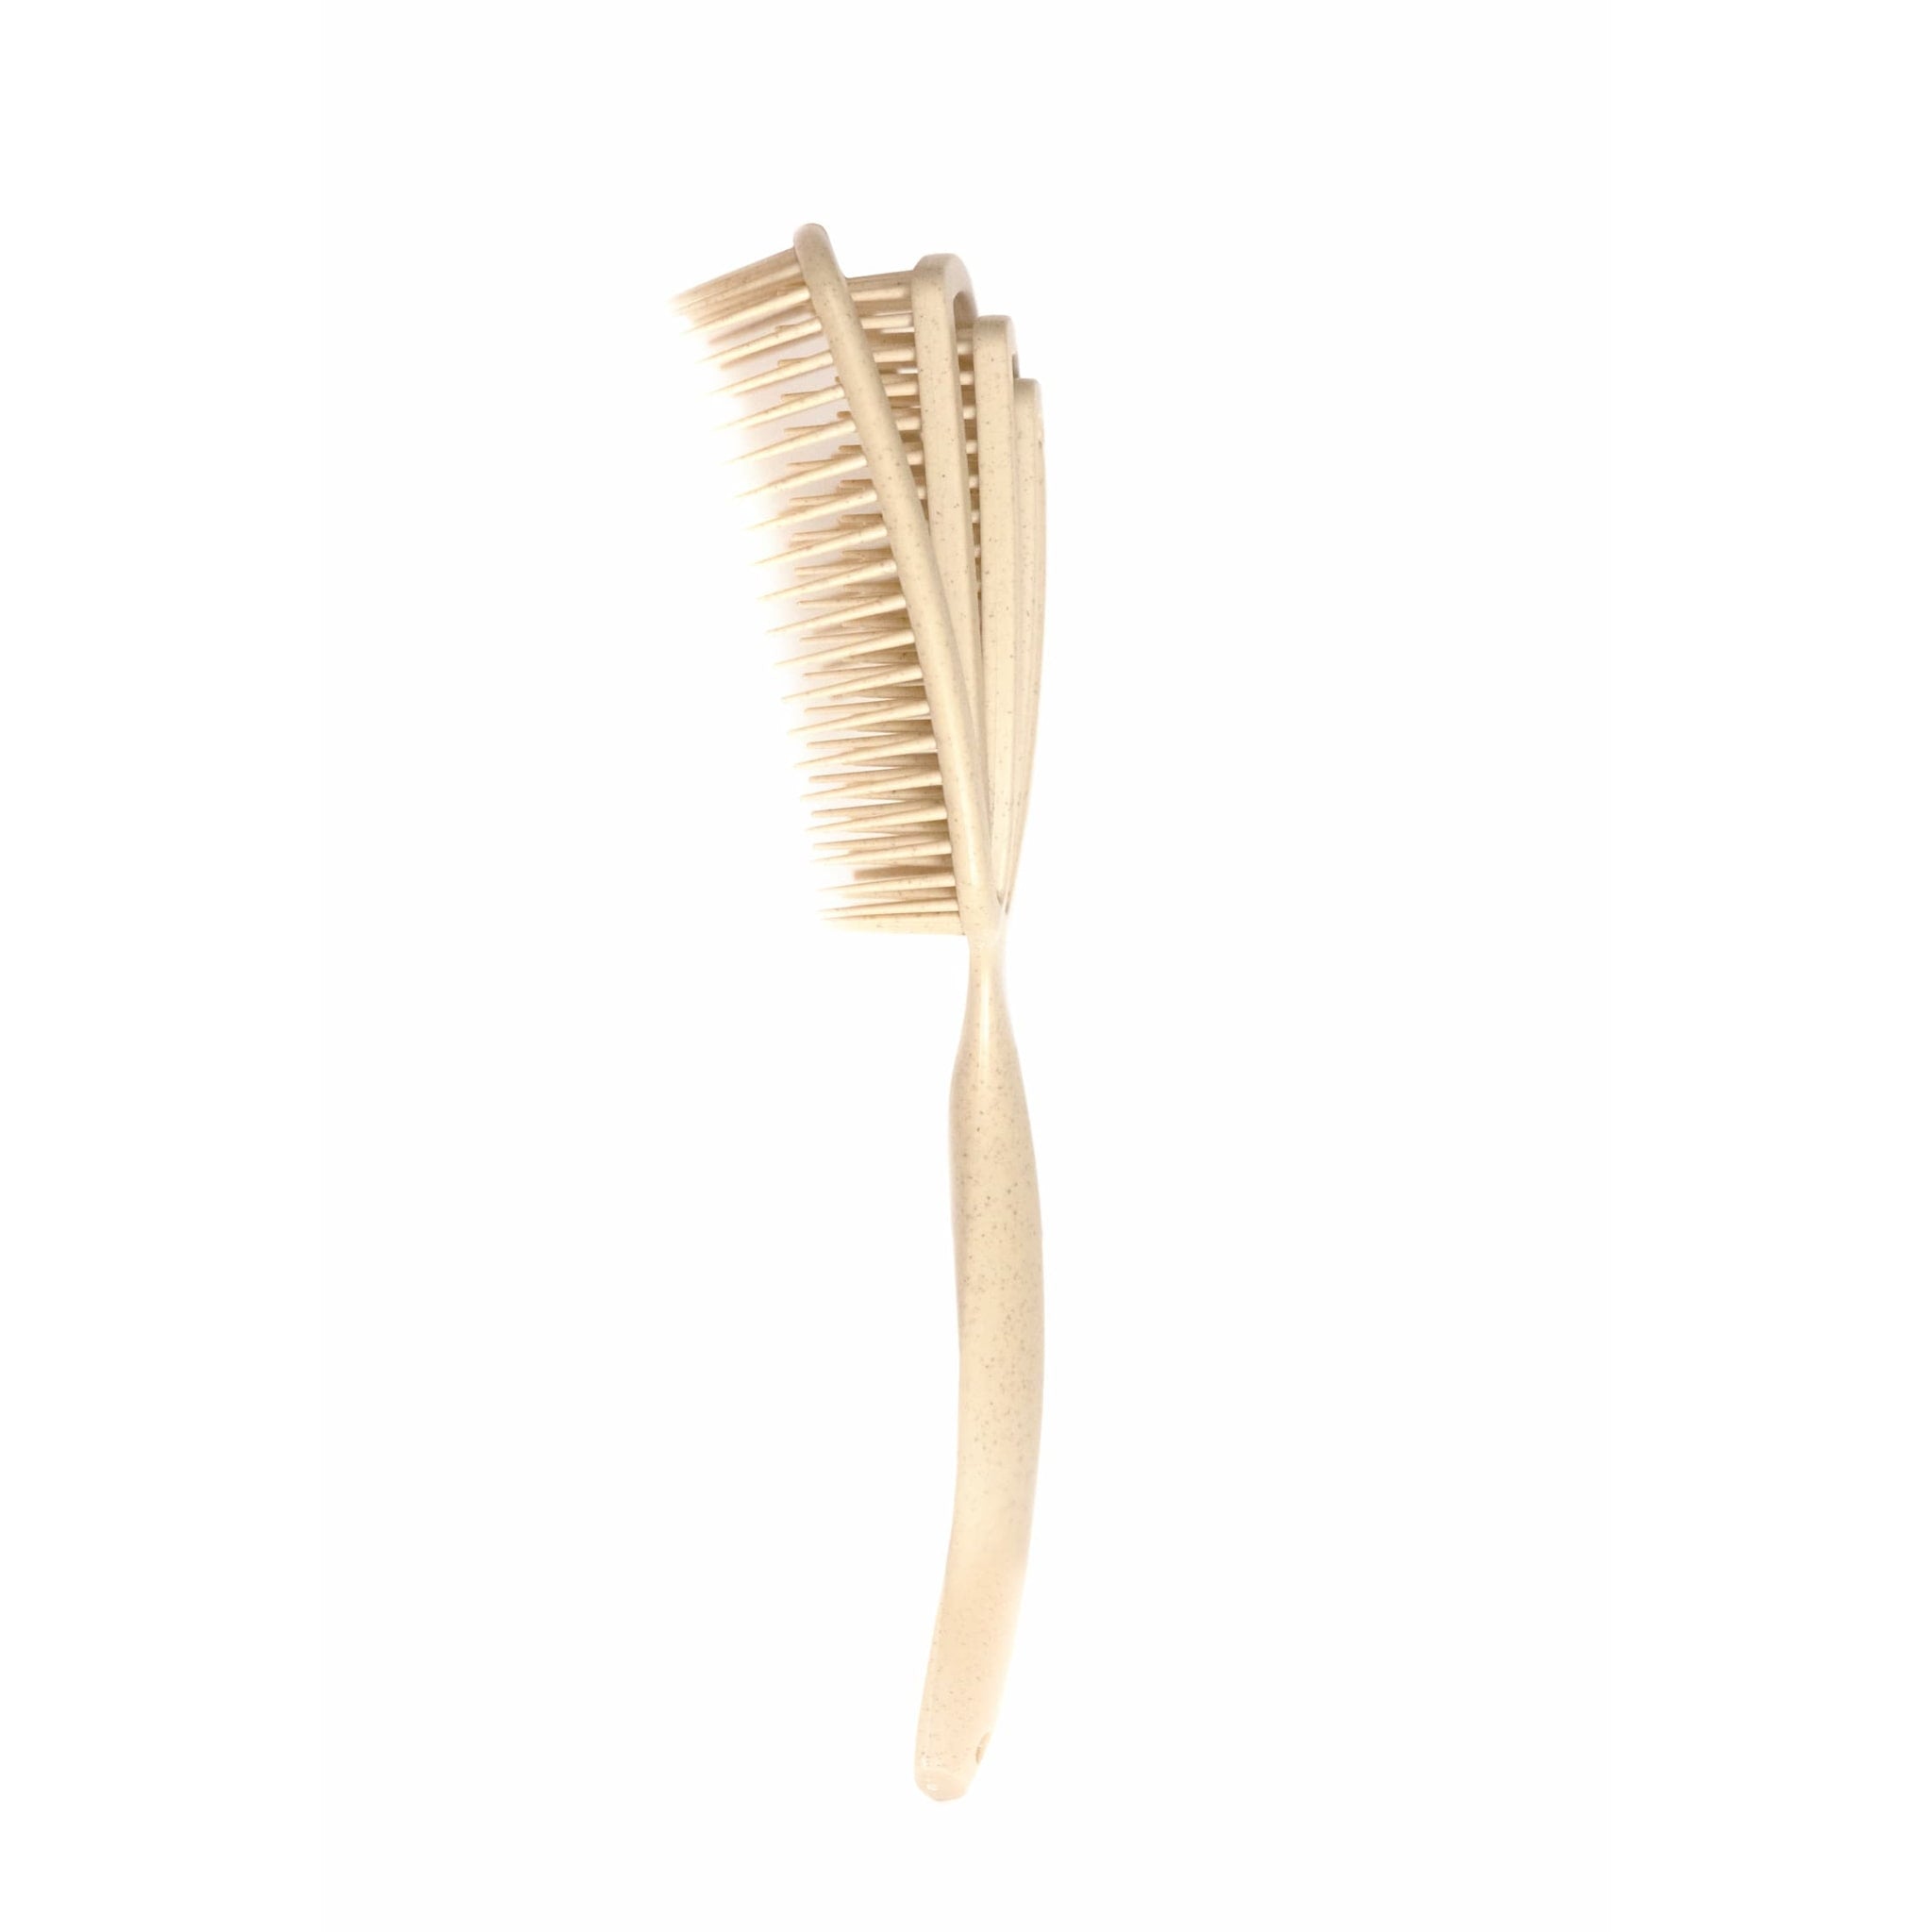 To112 Detangling Brush with 5-way flex to prevent breakage and speed up blow drying time